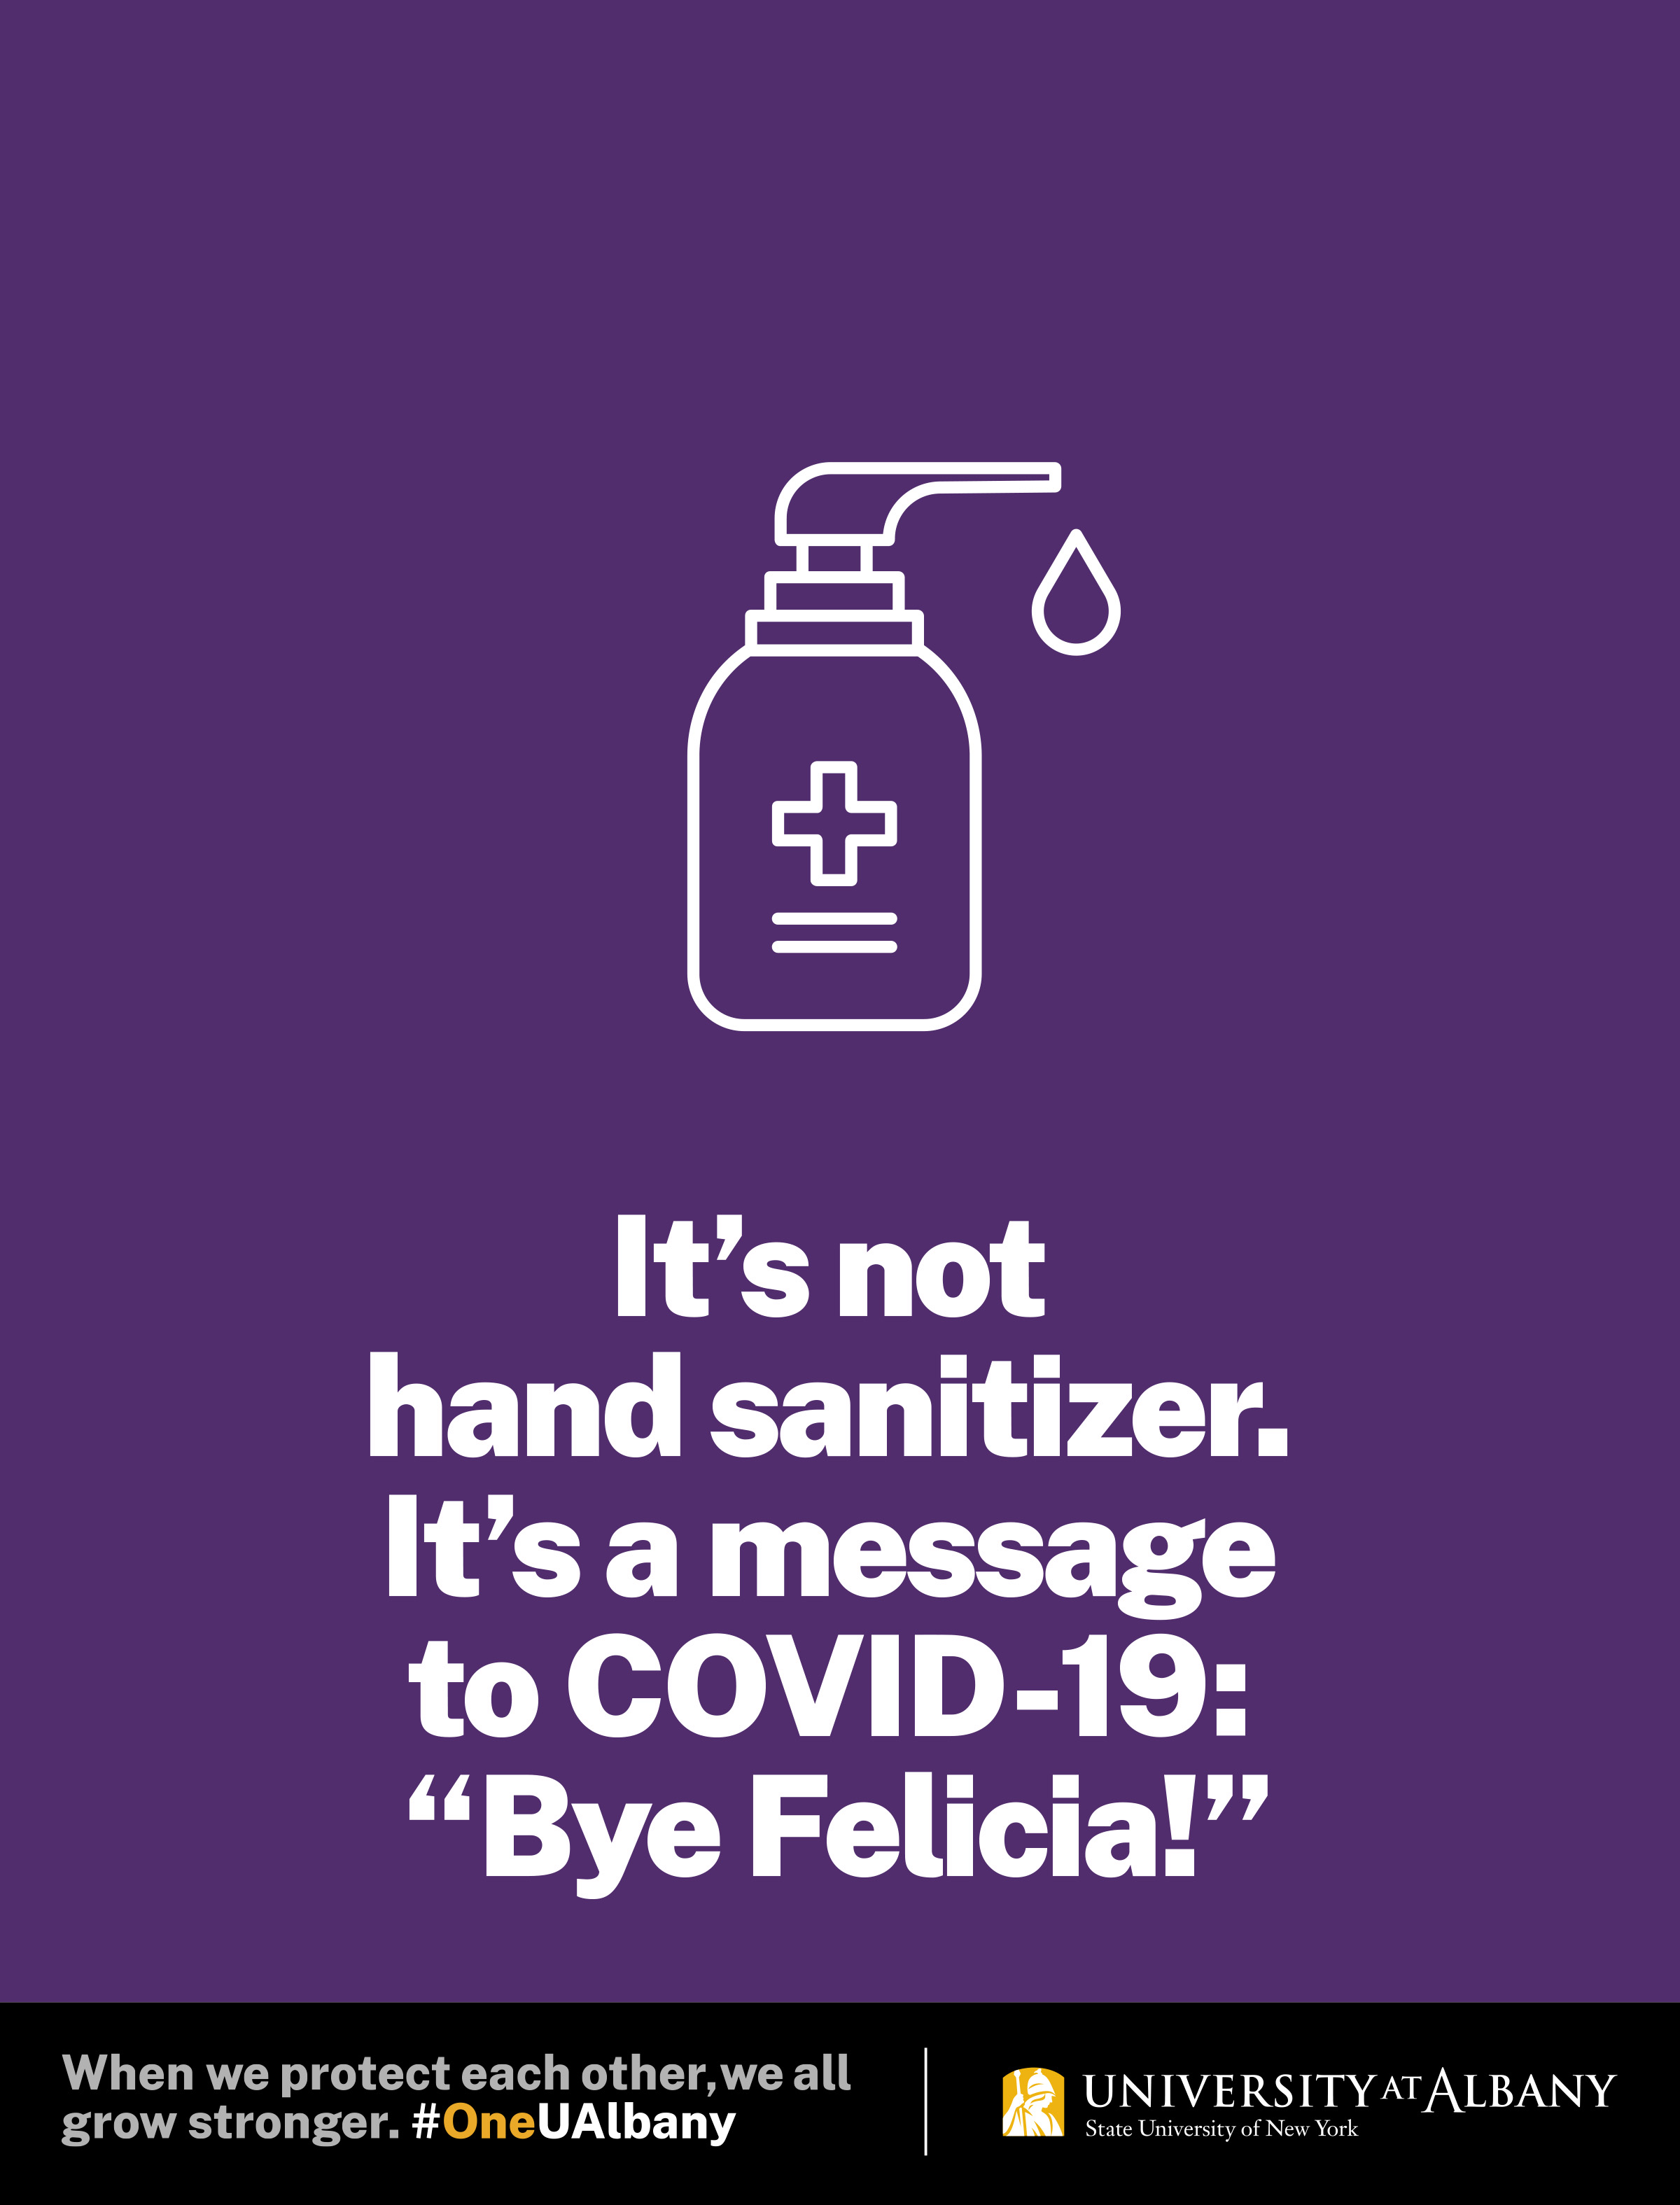 It's not hand sanitizer. It's a message to COVID-19: "Bye Felicia!"